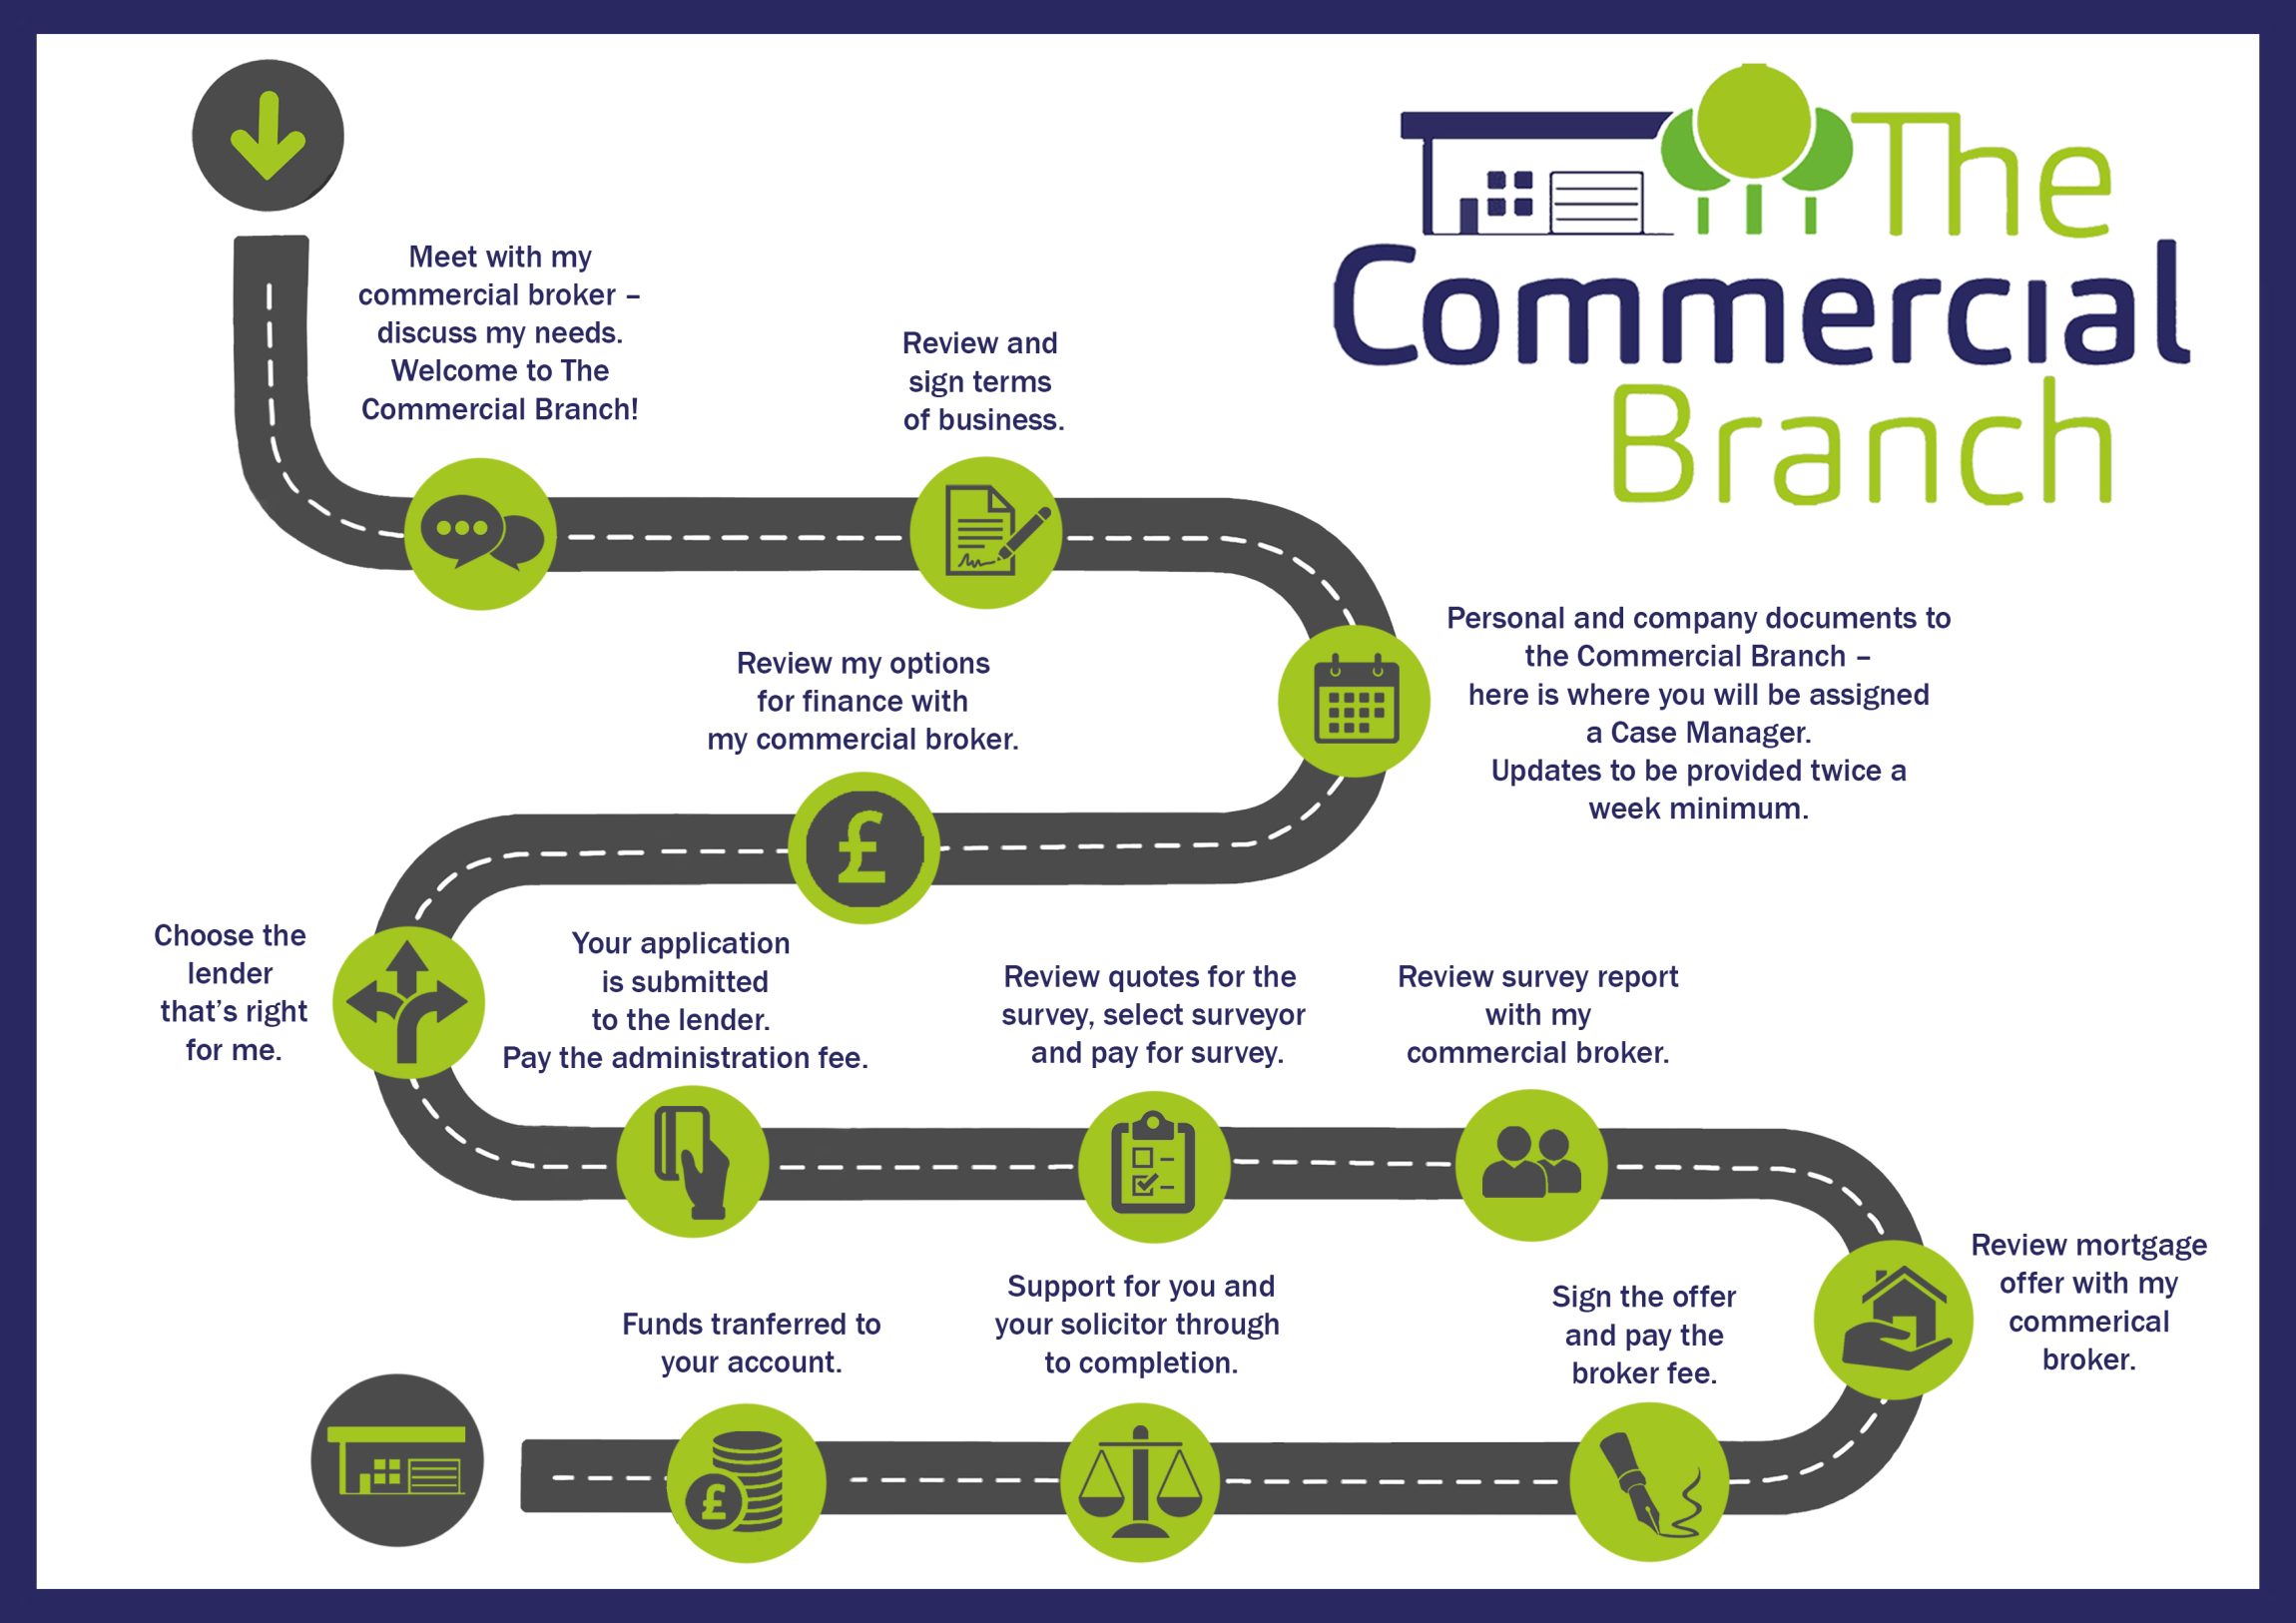 The Roadmap for The Commercial Branch